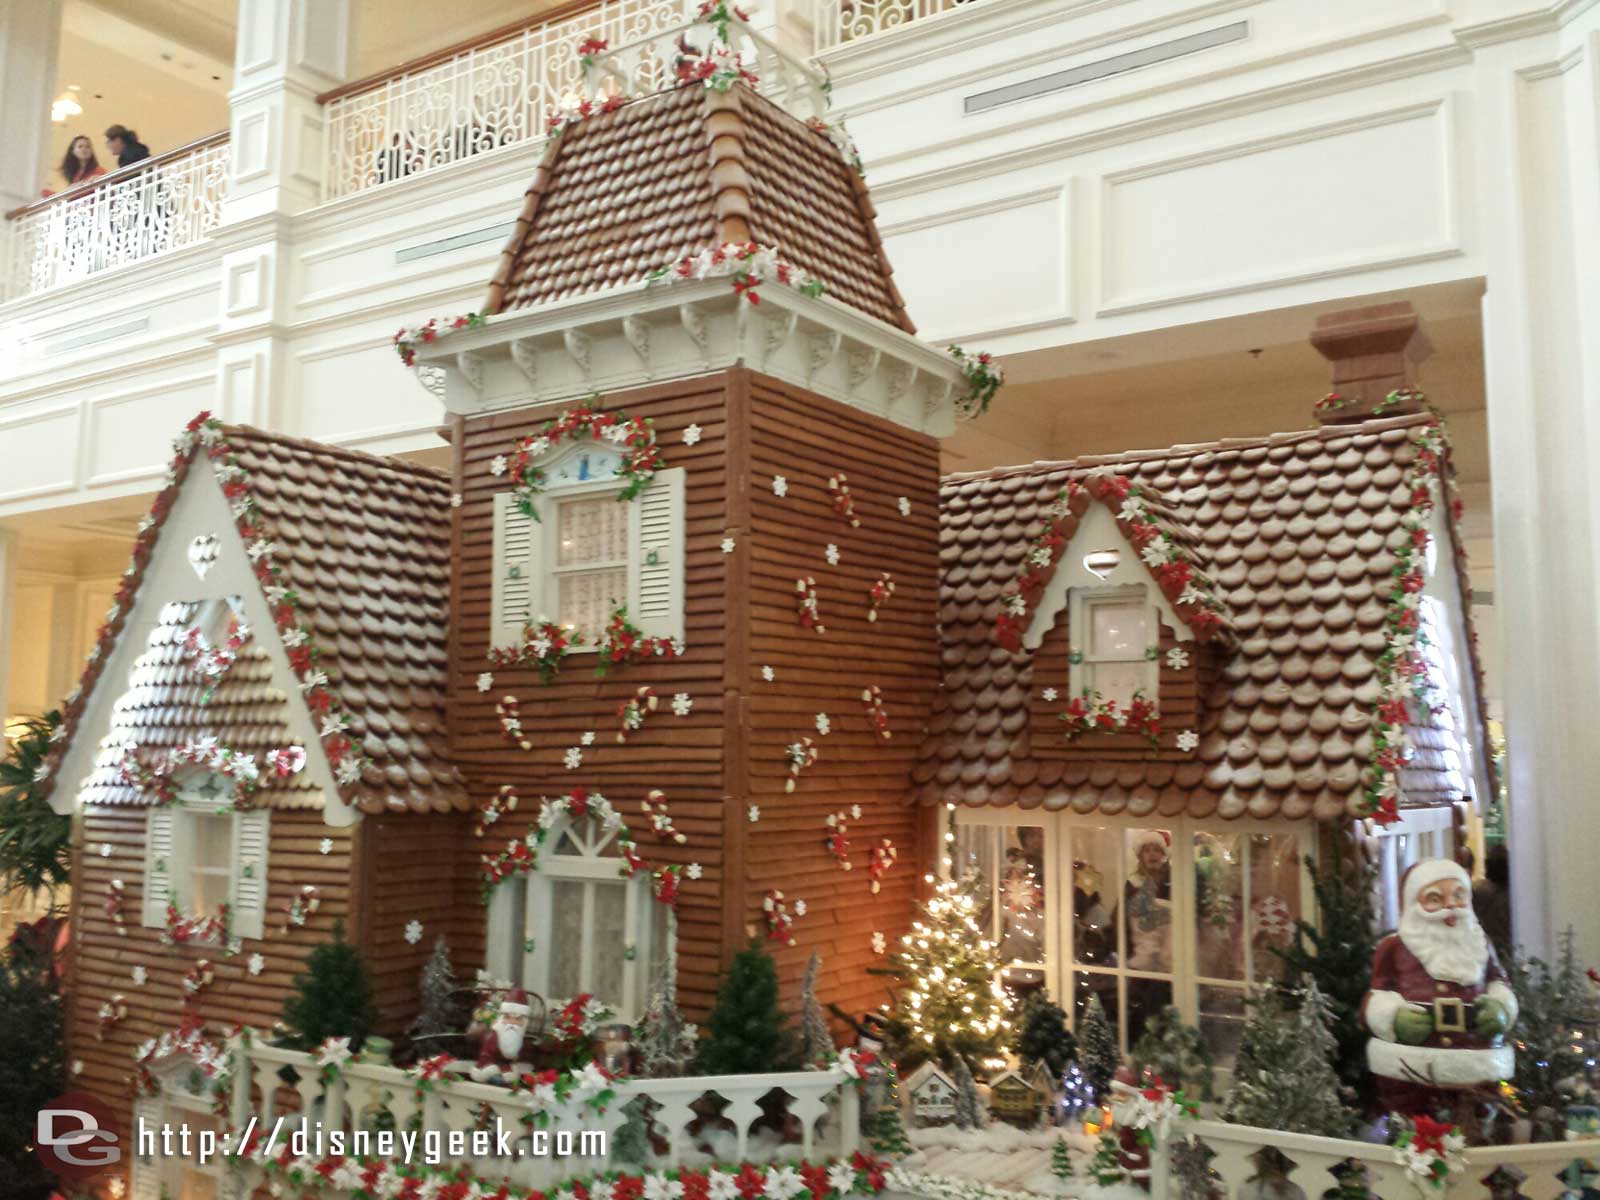 The Grand Floridian gingerbread house.